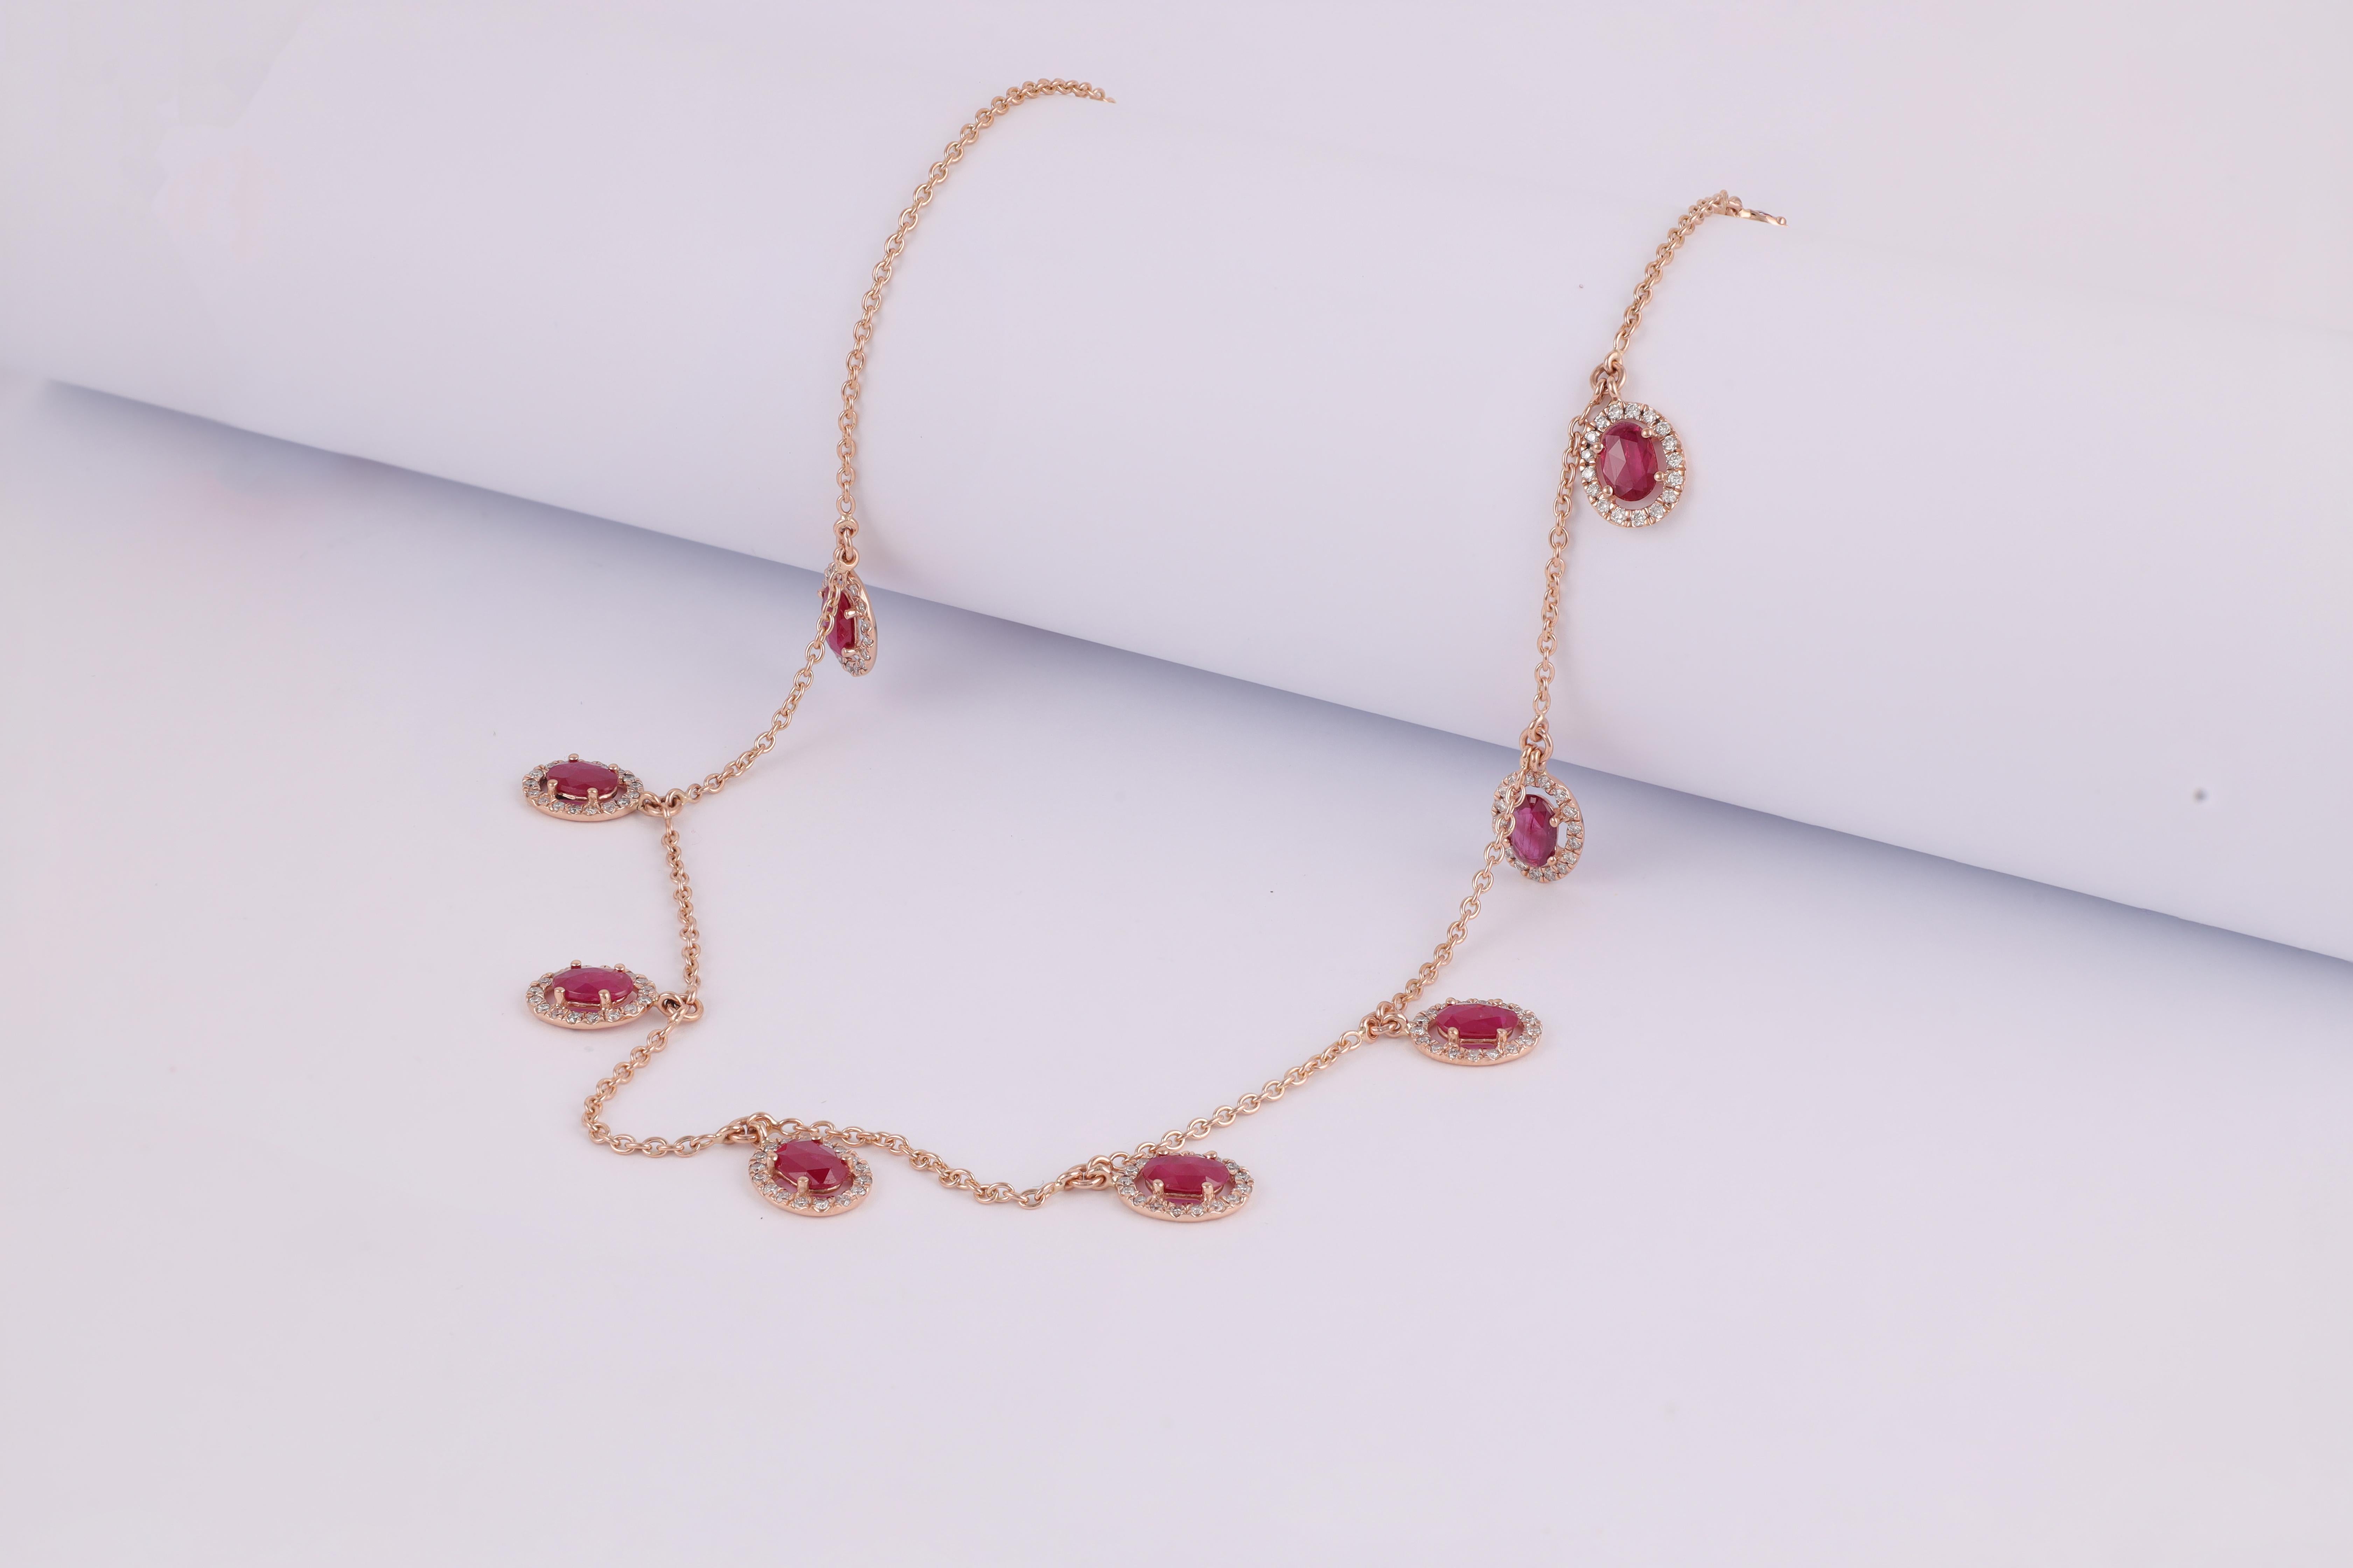 Modernist 3.02 Carats Ruby & 0.83 Carats Diamond Chain Necklace in 18k Rose Gold For Sale